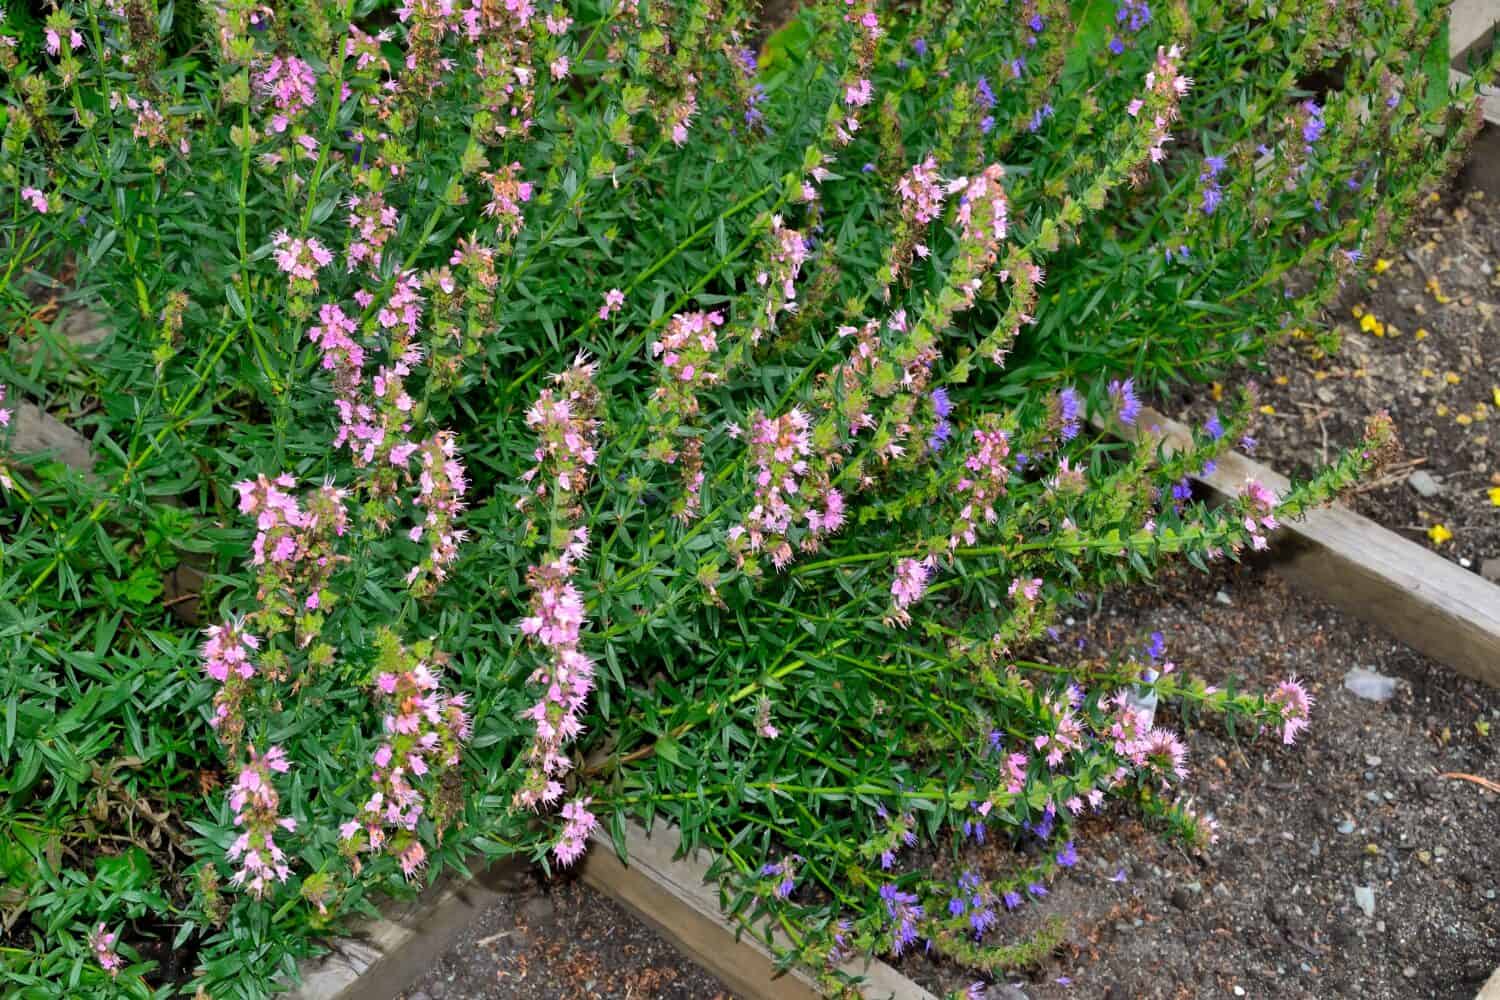 Blue and pink flowers of hyssop or hyssopus officinalis - beautiful hardy plant in summer garden. Hyssop is medicinal herb, aromatic condiment, good honey plant and decorative plant for gardening